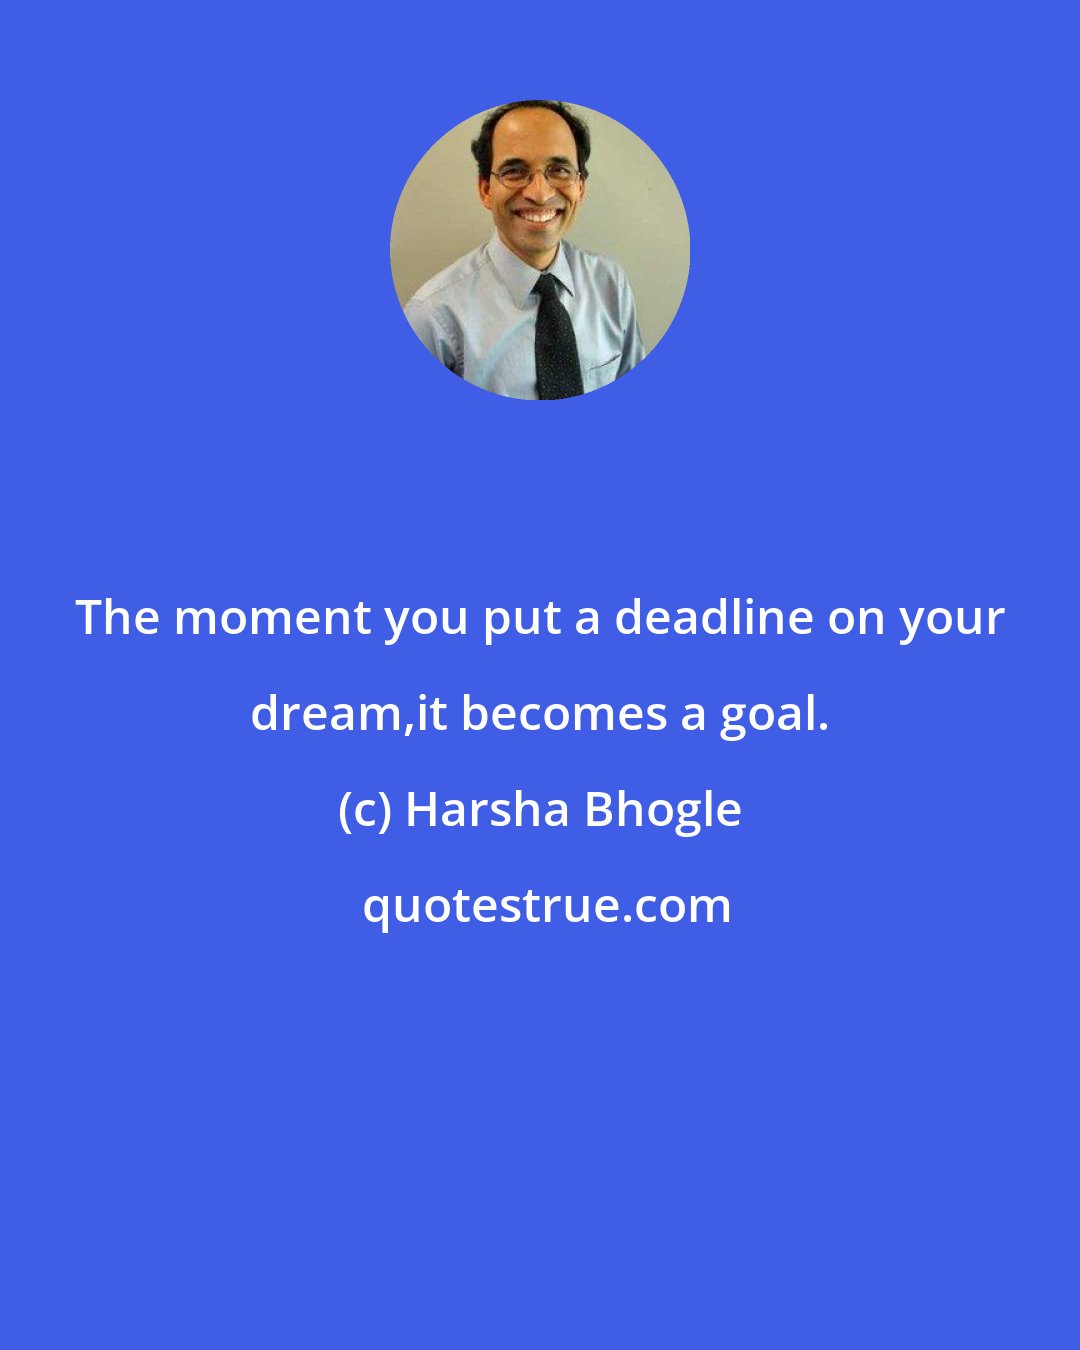 Harsha Bhogle: The moment you put a deadline on your dream,it becomes a goal.